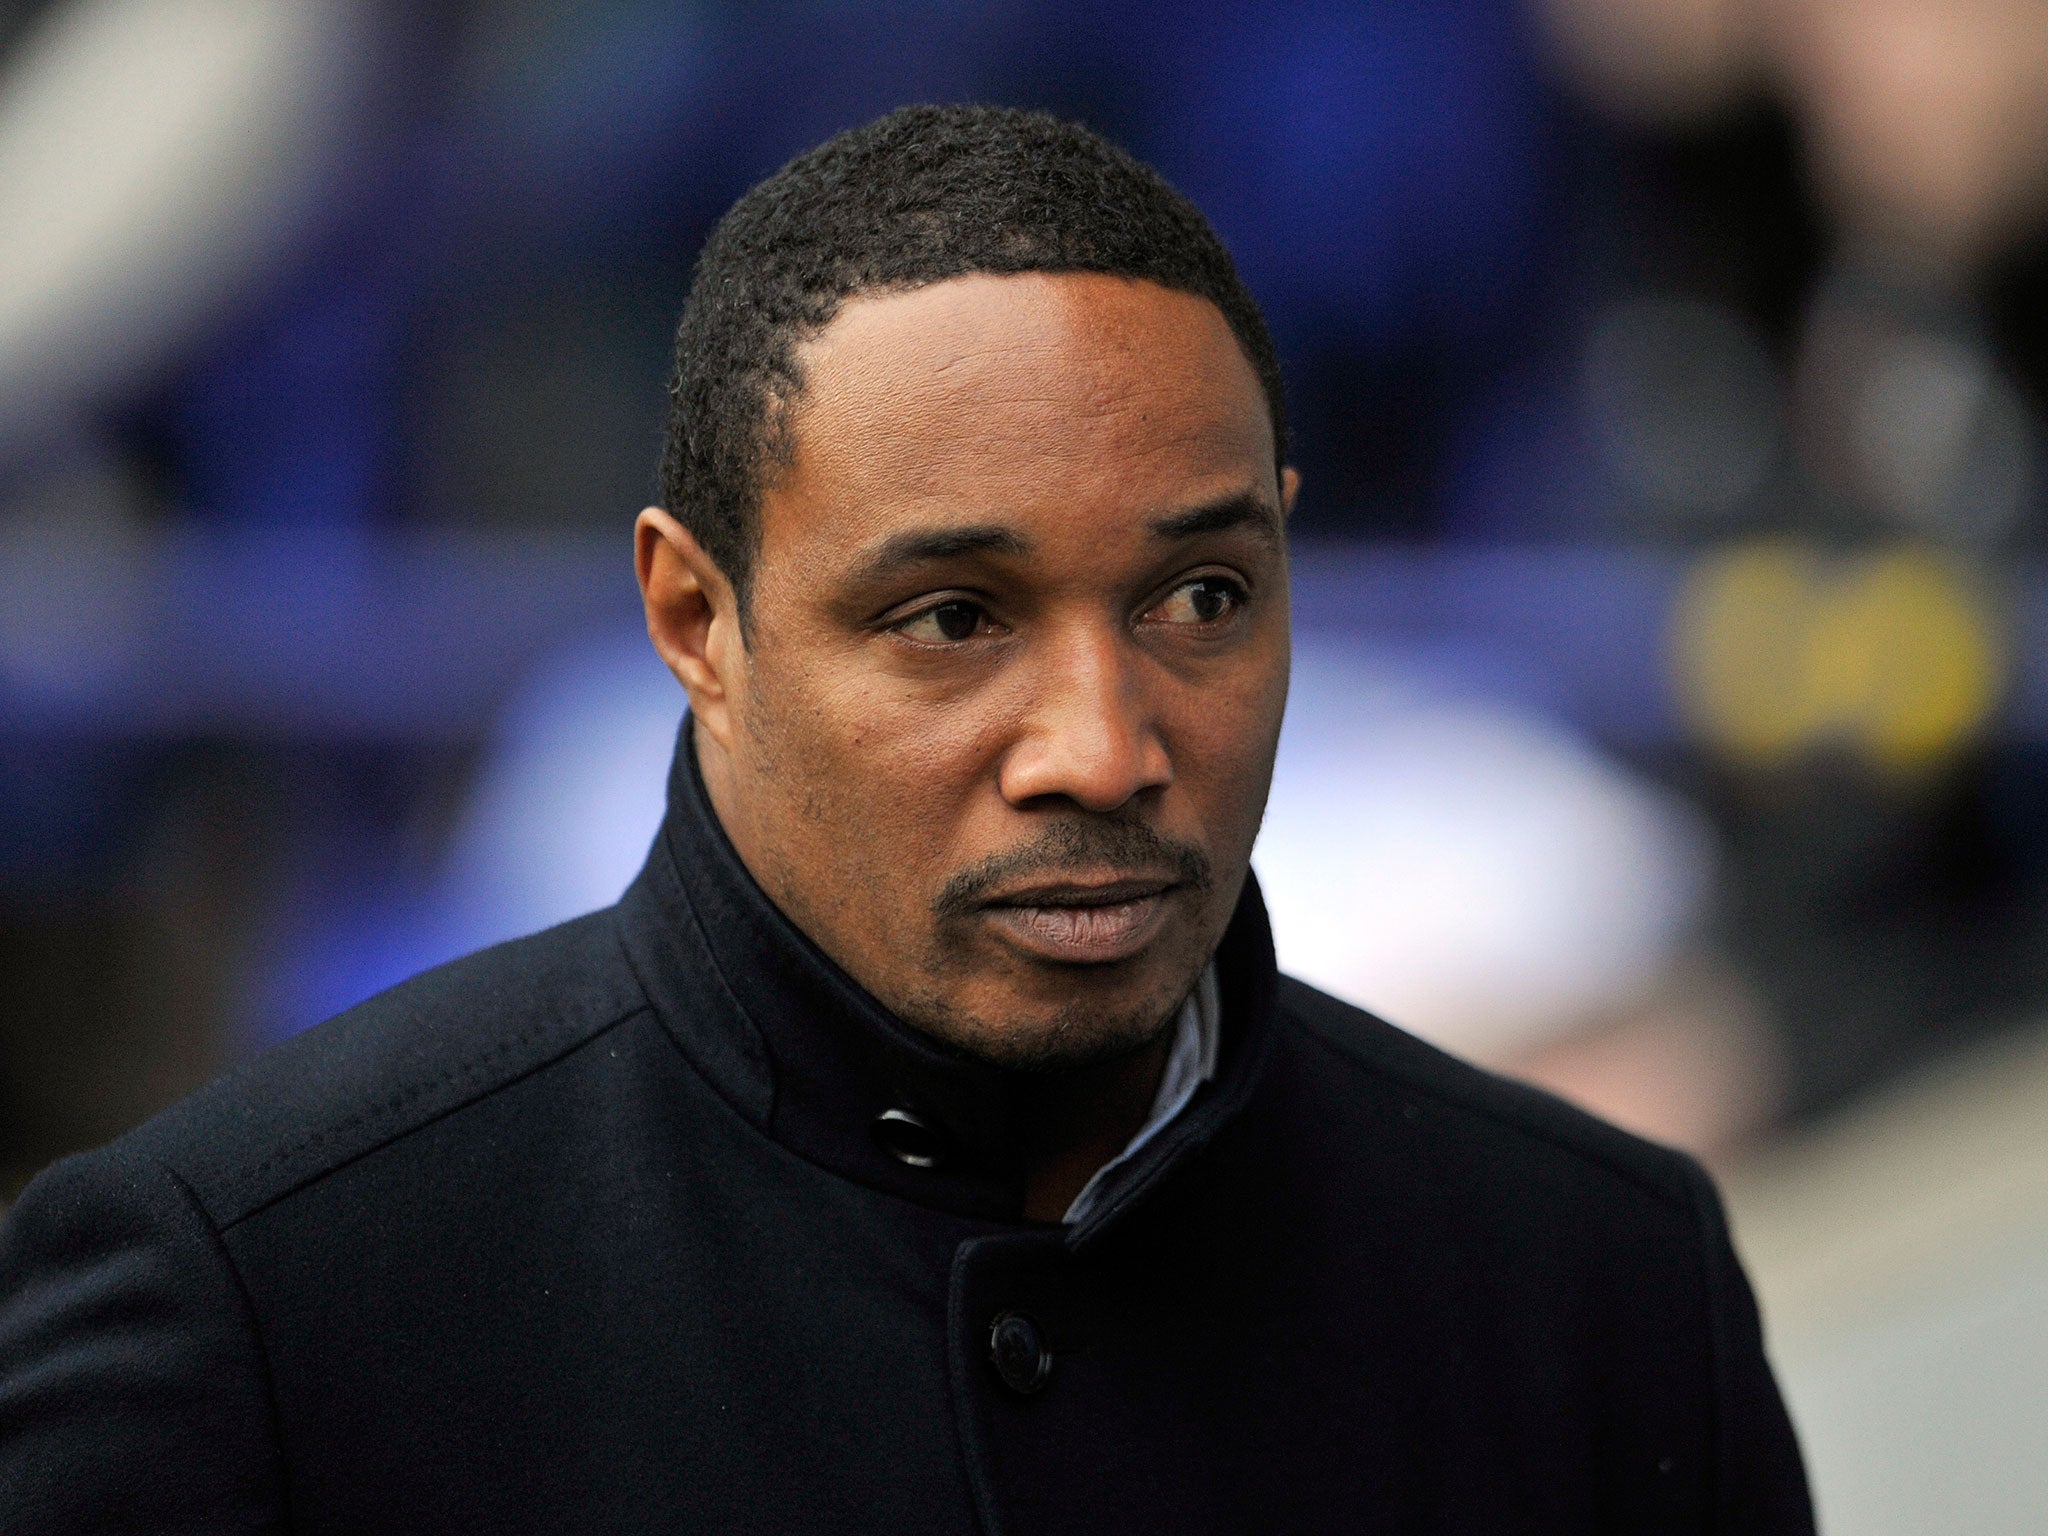 Paul Ince has found himself in hot water